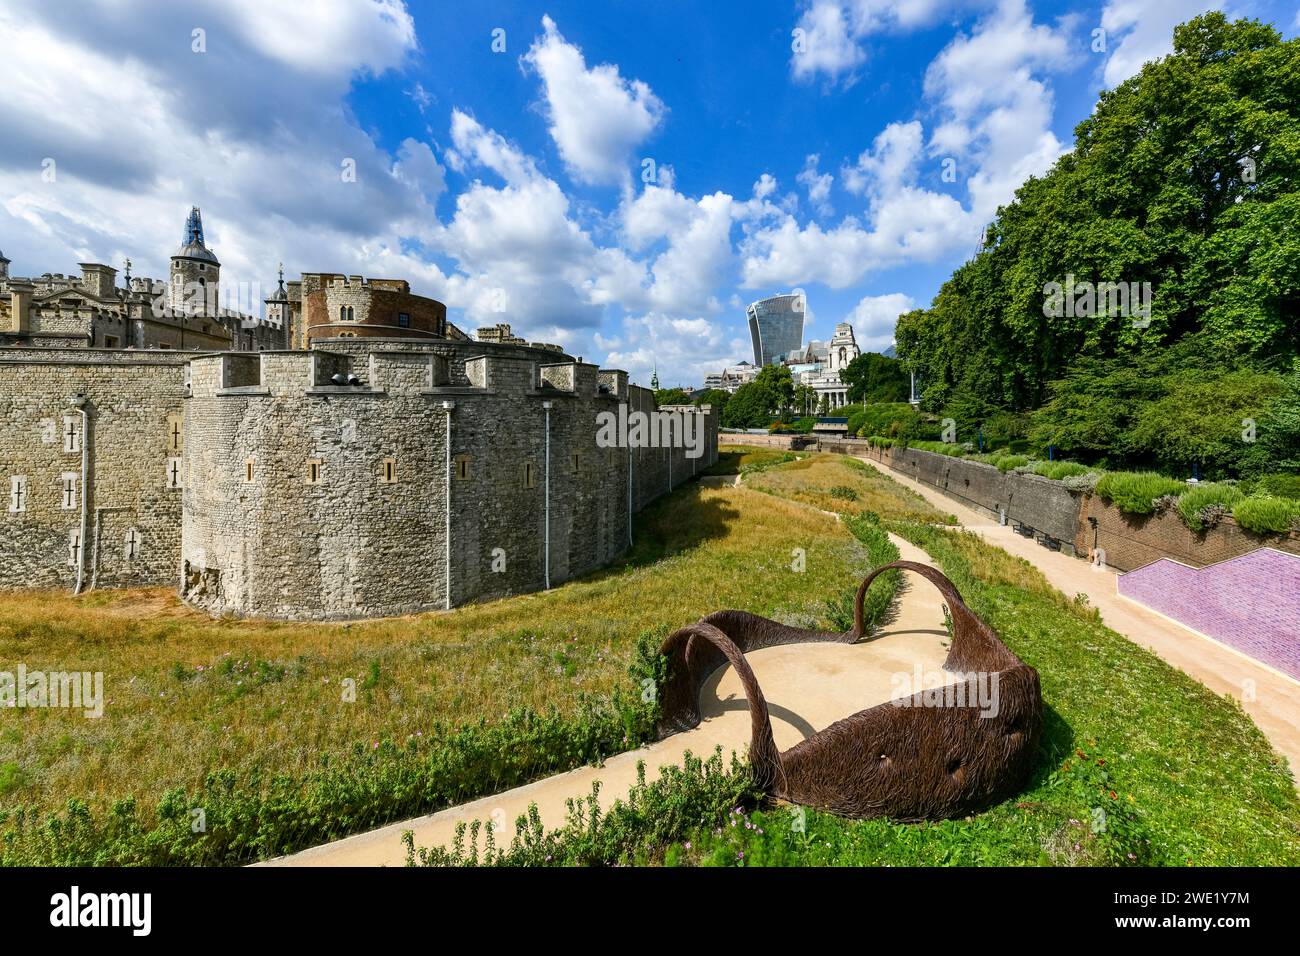 Tower of London. Der Tower of London, offiziell His Majesty's Royal Palace and Fortress of the Tower of London, ist eine historische Burg auf dem nördlichen Ban Stockfoto